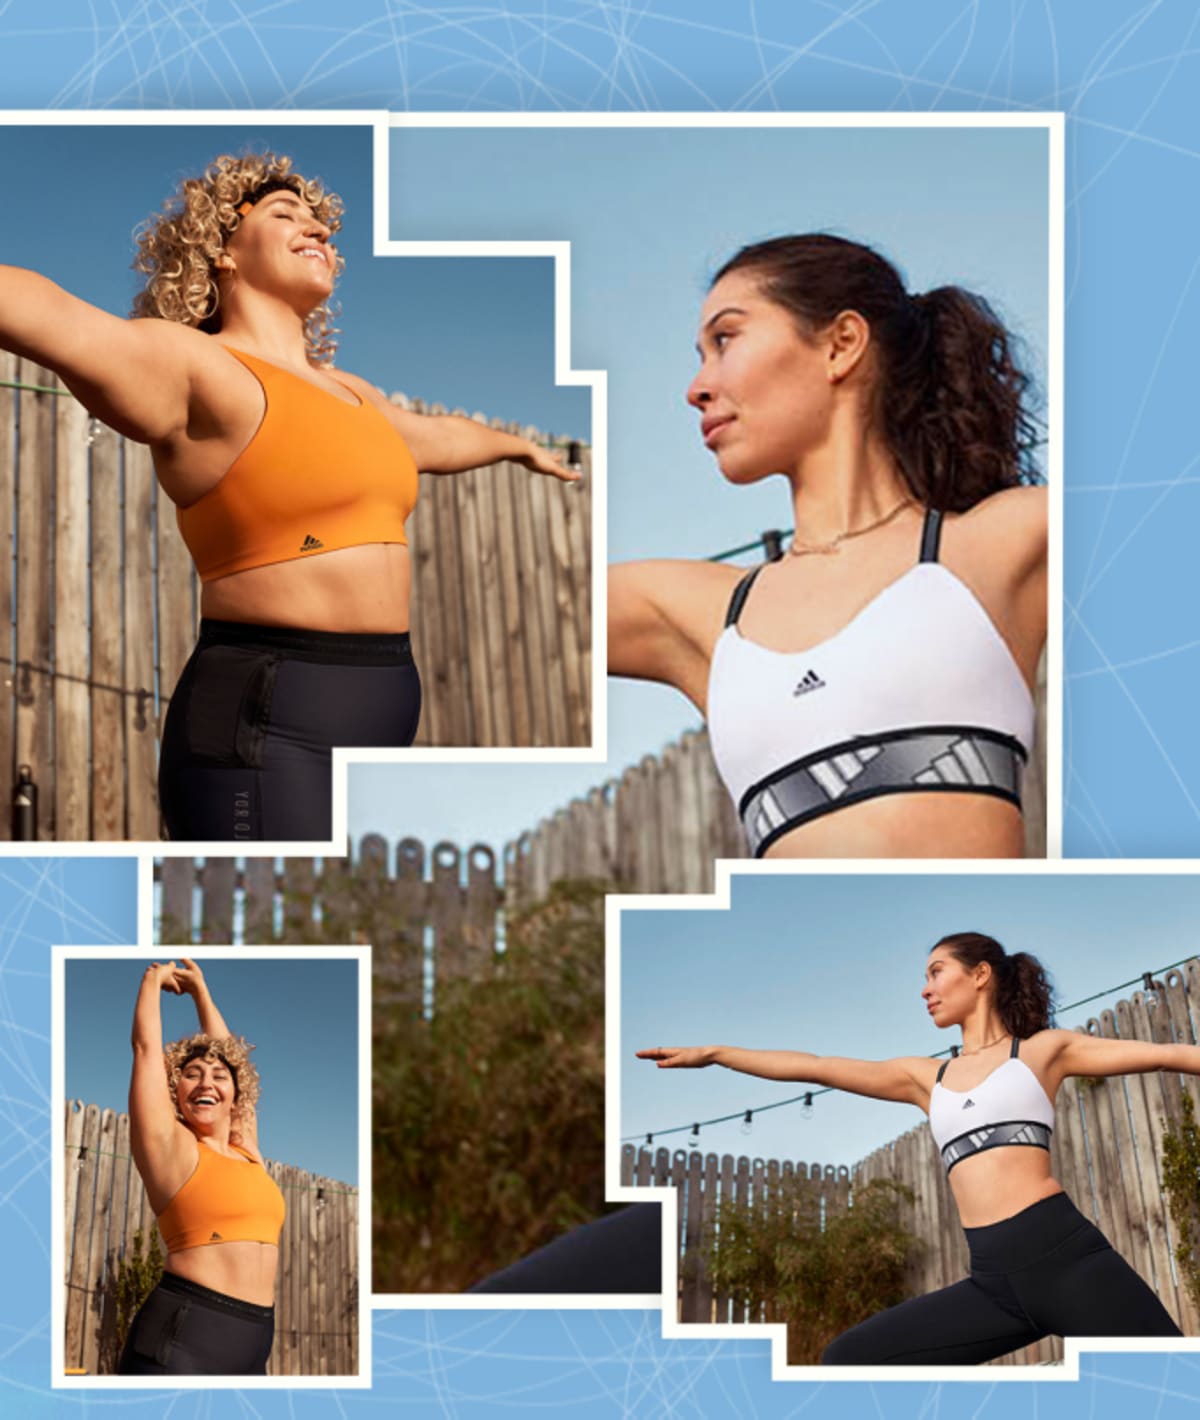 Does a New Adidas Ad Co-Opt the Body Positivity Movement?